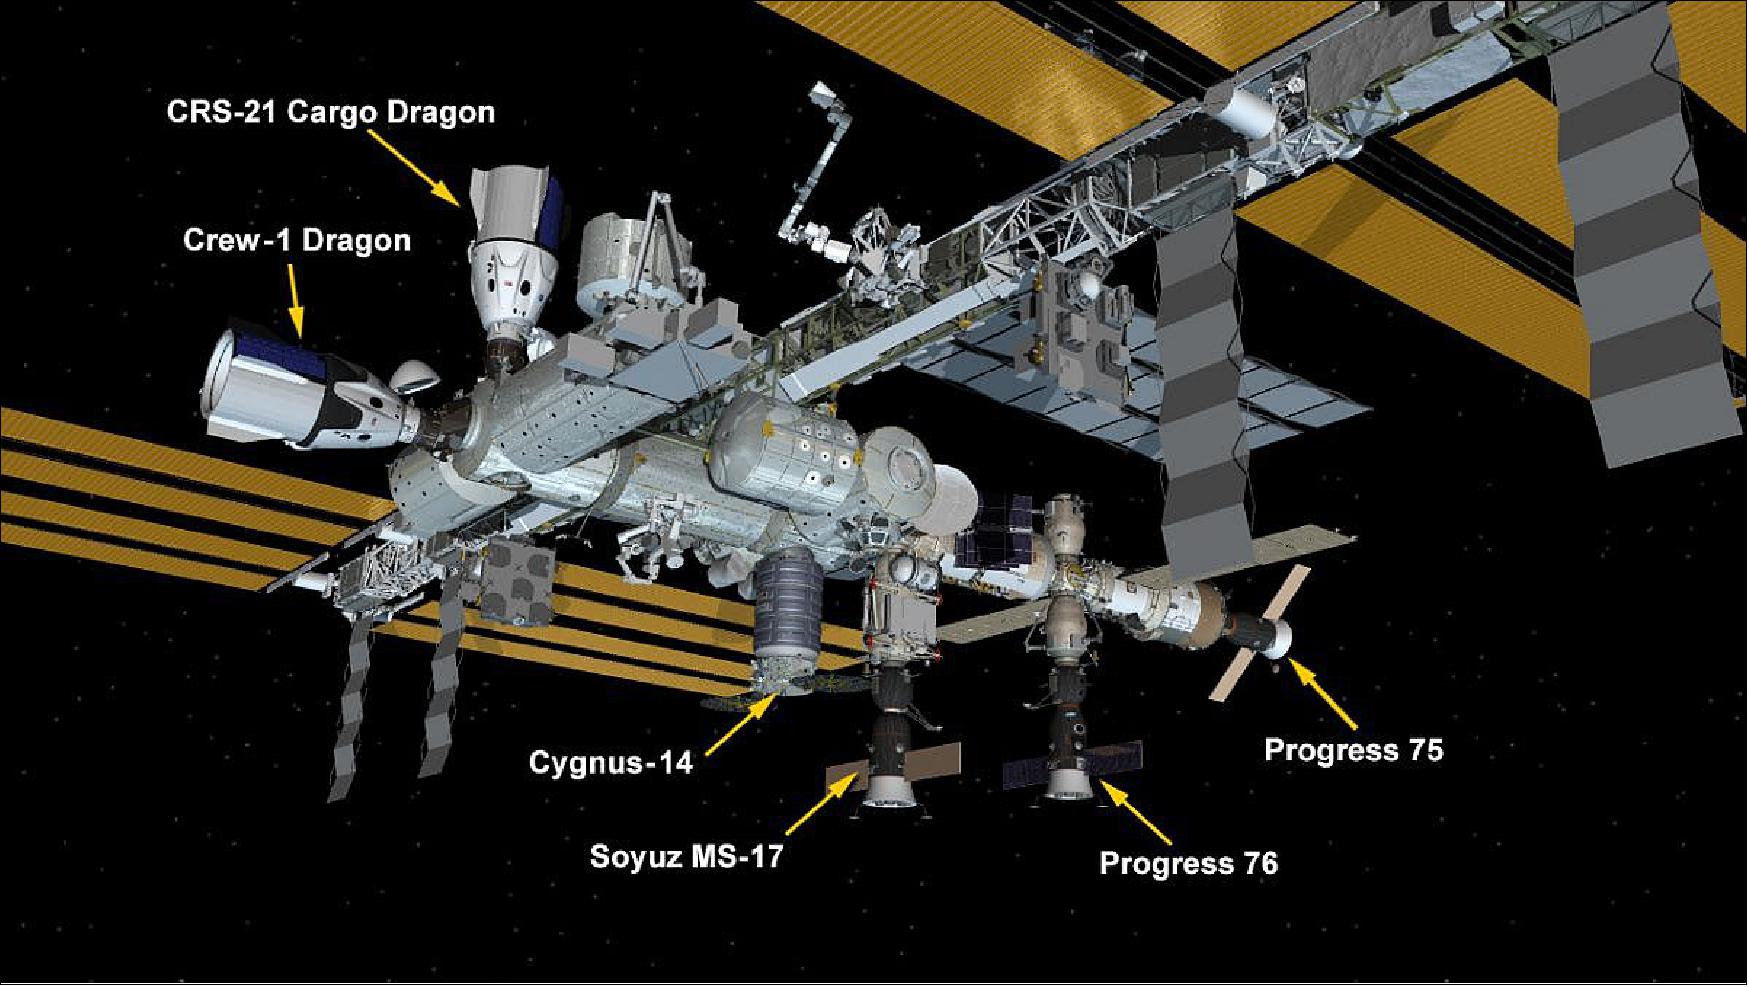 Figure 19: ISS configuration as of 7 December 2020. Six spaceships are parked at the space station including the SpaceX Crew Dragon and Cargo Dragon vehicles, Northrop Grumman’s Cygnus-14 resupply ship, all three from the United States, and Russia’s Progress 75 and 76 resupply ships and the Soyuz MS-17 crew ship (image credit: NASA)